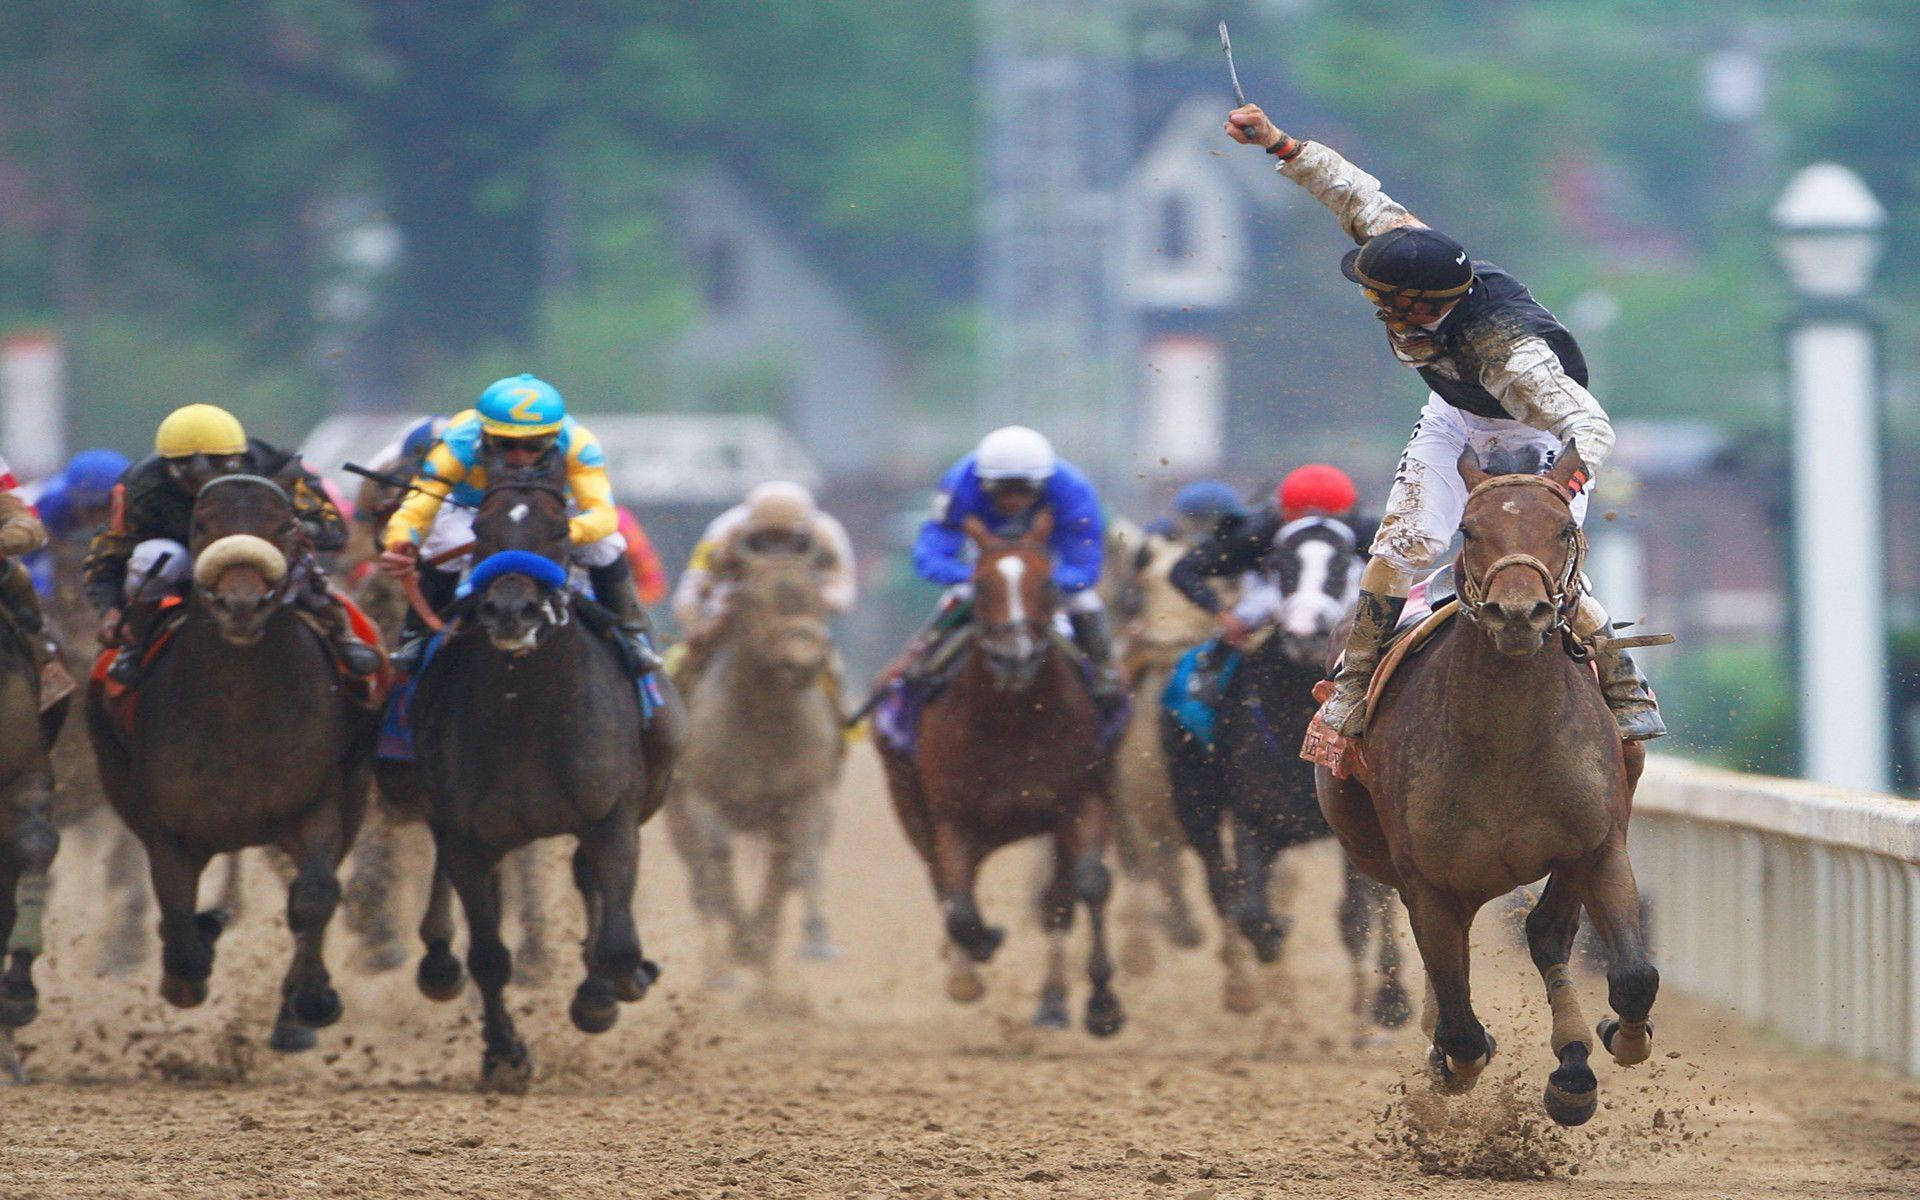 Caption: Intense Horse Racing On A Muddy Track Background